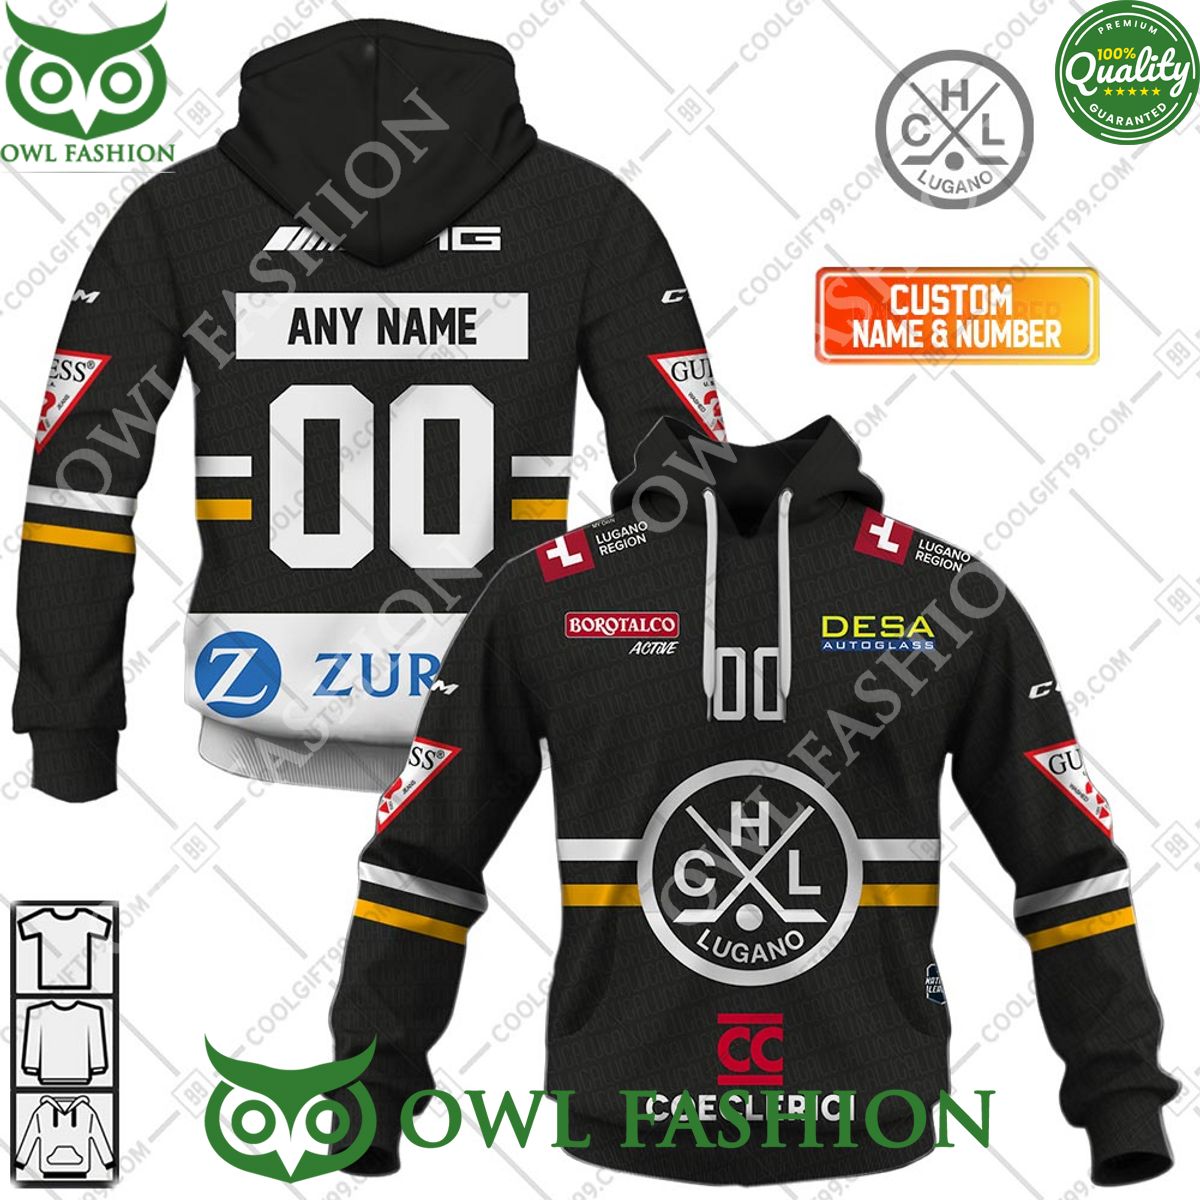 Personalized Name and Number NL Hockey HC Lugano Home jersey Style printed Hoodie shirt